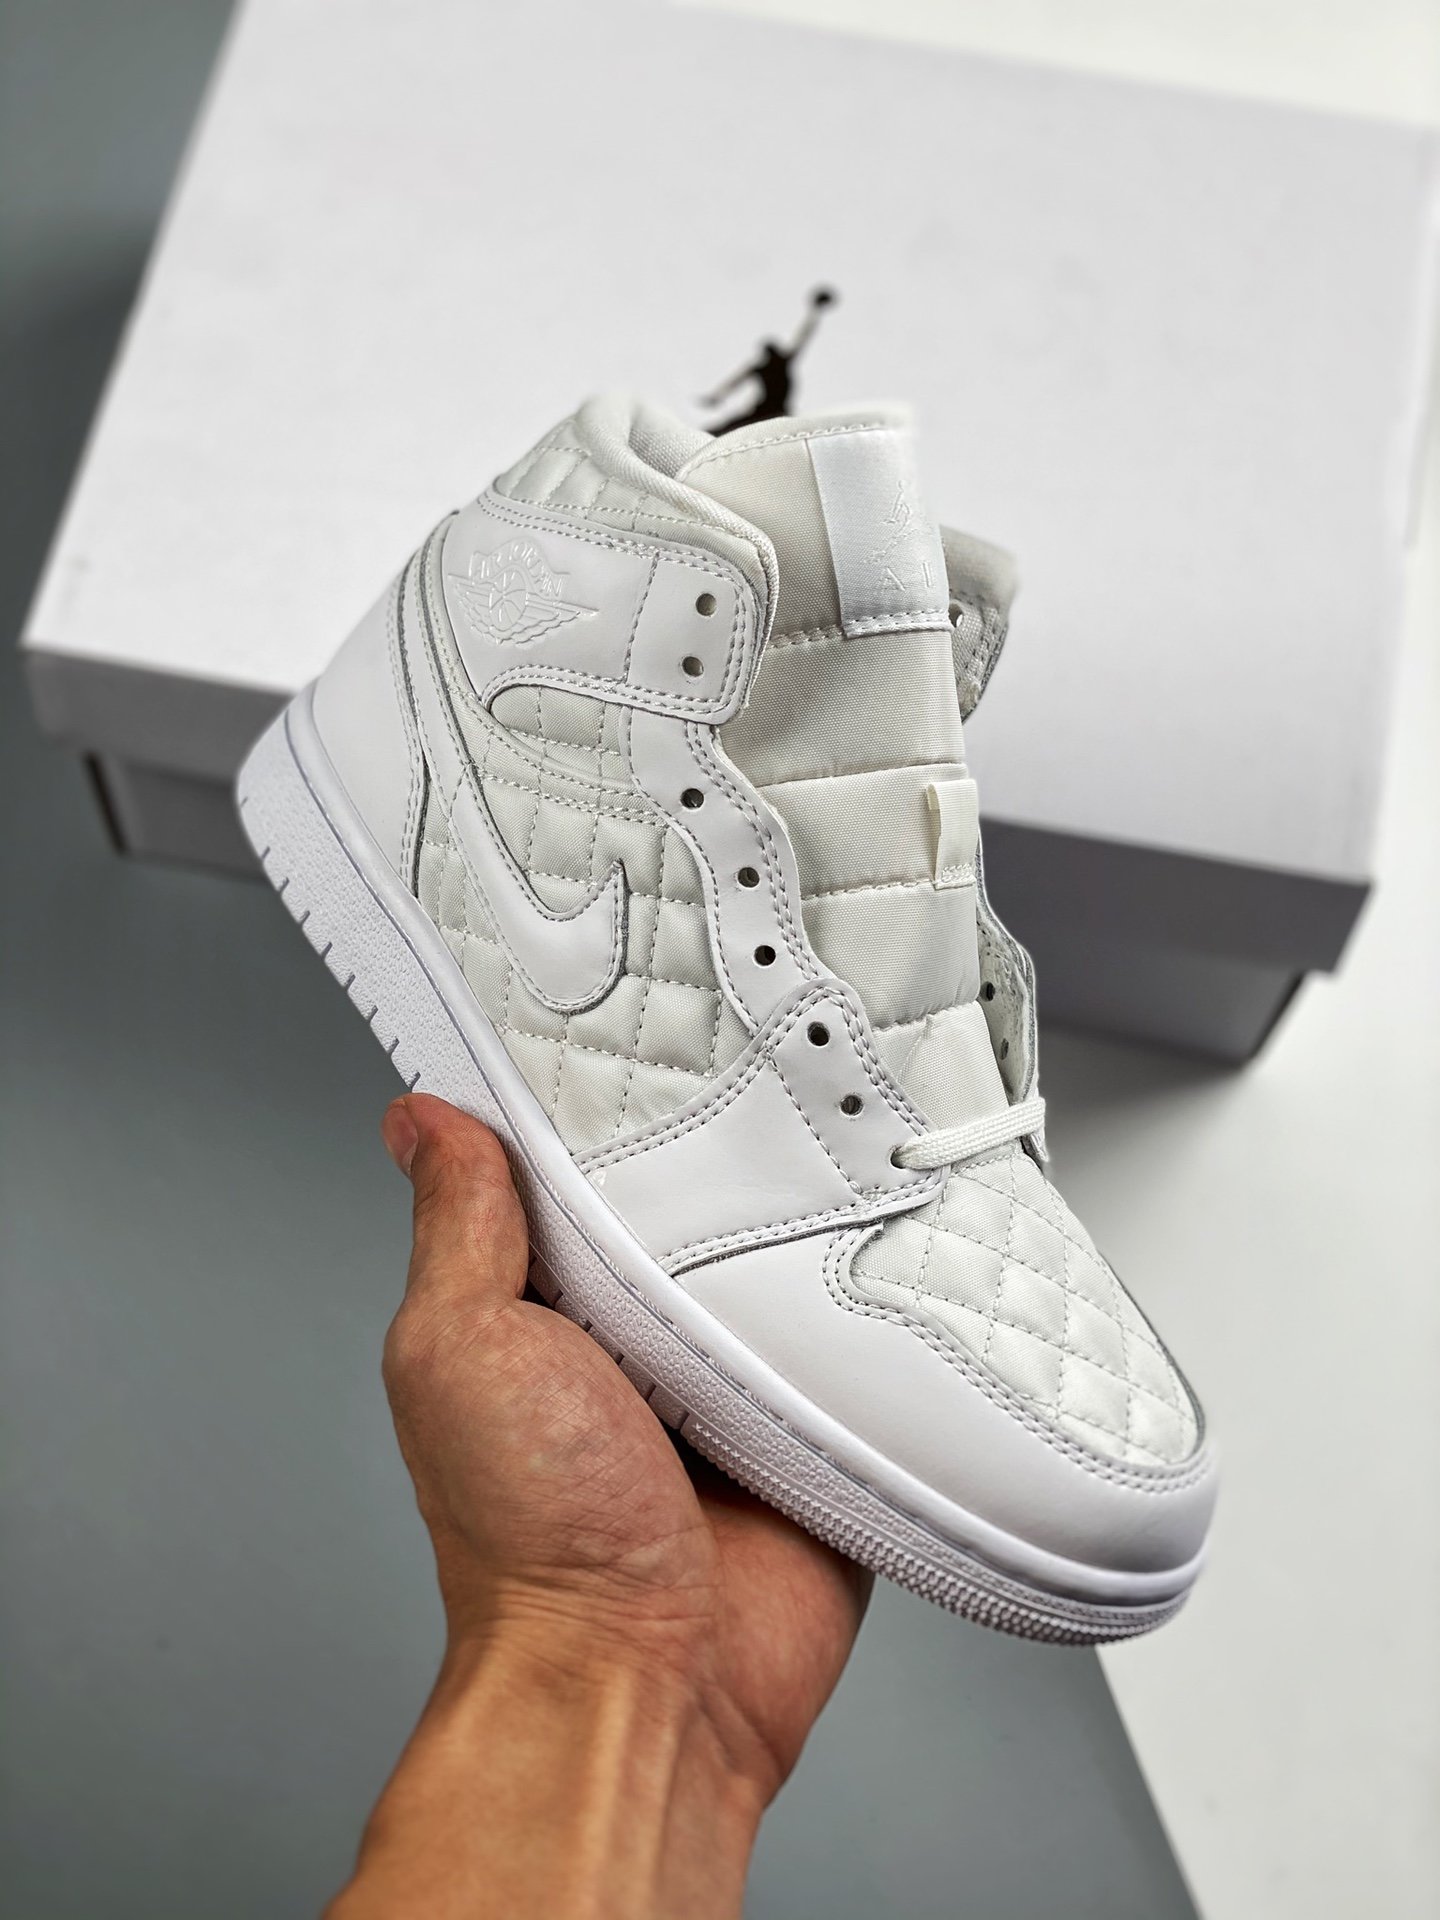 Air JD Jordan 1 Mid SE "White Quilted" DB6078-100 Shoes